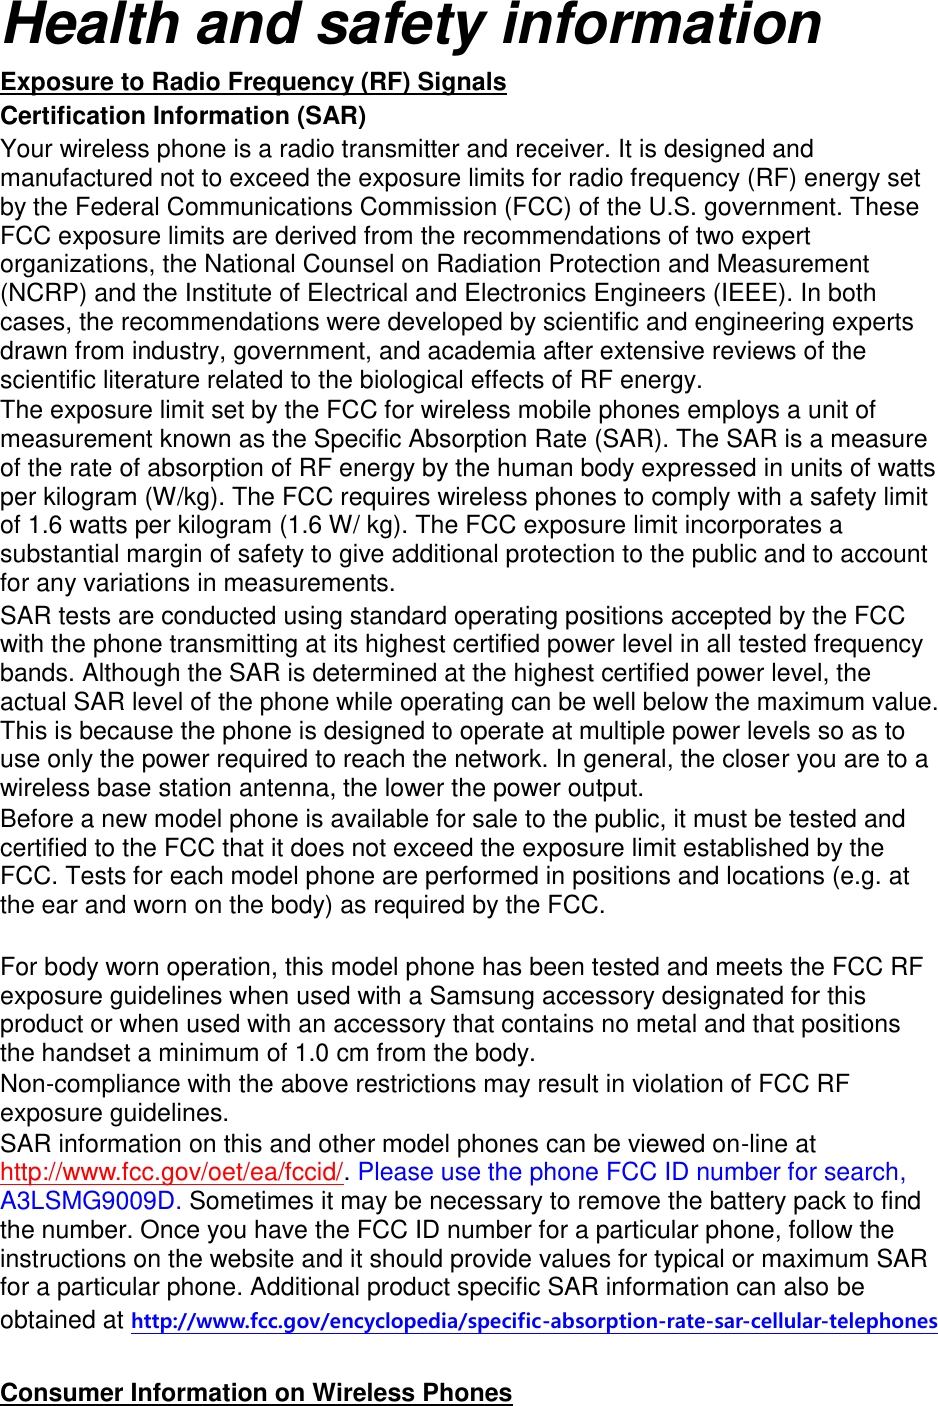 Health and safety information Exposure to Radio Frequency (RF) Signals Certification Information (SAR) Your wireless phone is a radio transmitter and receiver. It is designed and manufactured not to exceed the exposure limits for radio frequency (RF) energy set by the Federal Communications Commission (FCC) of the U.S. government. These FCC exposure limits are derived from the recommendations of two expert organizations, the National Counsel on Radiation Protection and Measurement (NCRP) and the Institute of Electrical and Electronics Engineers (IEEE). In both cases, the recommendations were developed by scientific and engineering experts drawn from industry, government, and academia after extensive reviews of the scientific literature related to the biological effects of RF energy. The exposure limit set by the FCC for wireless mobile phones employs a unit of measurement known as the Specific Absorption Rate (SAR). The SAR is a measure of the rate of absorption of RF energy by the human body expressed in units of watts per kilogram (W/kg). The FCC requires wireless phones to comply with a safety limit of 1.6 watts per kilogram (1.6 W/ kg). The FCC exposure limit incorporates a substantial margin of safety to give additional protection to the public and to account for any variations in measurements. SAR tests are conducted using standard operating positions accepted by the FCC with the phone transmitting at its highest certified power level in all tested frequency bands. Although the SAR is determined at the highest certified power level, the actual SAR level of the phone while operating can be well below the maximum value. This is because the phone is designed to operate at multiple power levels so as to use only the power required to reach the network. In general, the closer you are to a wireless base station antenna, the lower the power output. Before a new model phone is available for sale to the public, it must be tested and certified to the FCC that it does not exceed the exposure limit established by the FCC. Tests for each model phone are performed in positions and locations (e.g. at the ear and worn on the body) as required by the FCC.      For body worn operation, this model phone has been tested and meets the FCC RF exposure guidelines when used with a Samsung accessory designated for this product or when used with an accessory that contains no metal and that positions the handset a minimum of 1.0 cm from the body.   Non-compliance with the above restrictions may result in violation of FCC RF exposure guidelines. SAR information on this and other model phones can be viewed on-line at http://www.fcc.gov/oet/ea/fccid/. Please use the phone FCC ID number for search, A3LSMG9009D. Sometimes it may be necessary to remove the battery pack to find the number. Once you have the FCC ID number for a particular phone, follow the instructions on the website and it should provide values for typical or maximum SAR for a particular phone. Additional product specific SAR information can also be obtained at http://www.fcc.gov/encyclopedia/specific-absorption-rate-sar-cellular-telephones  Consumer Information on Wireless Phones 